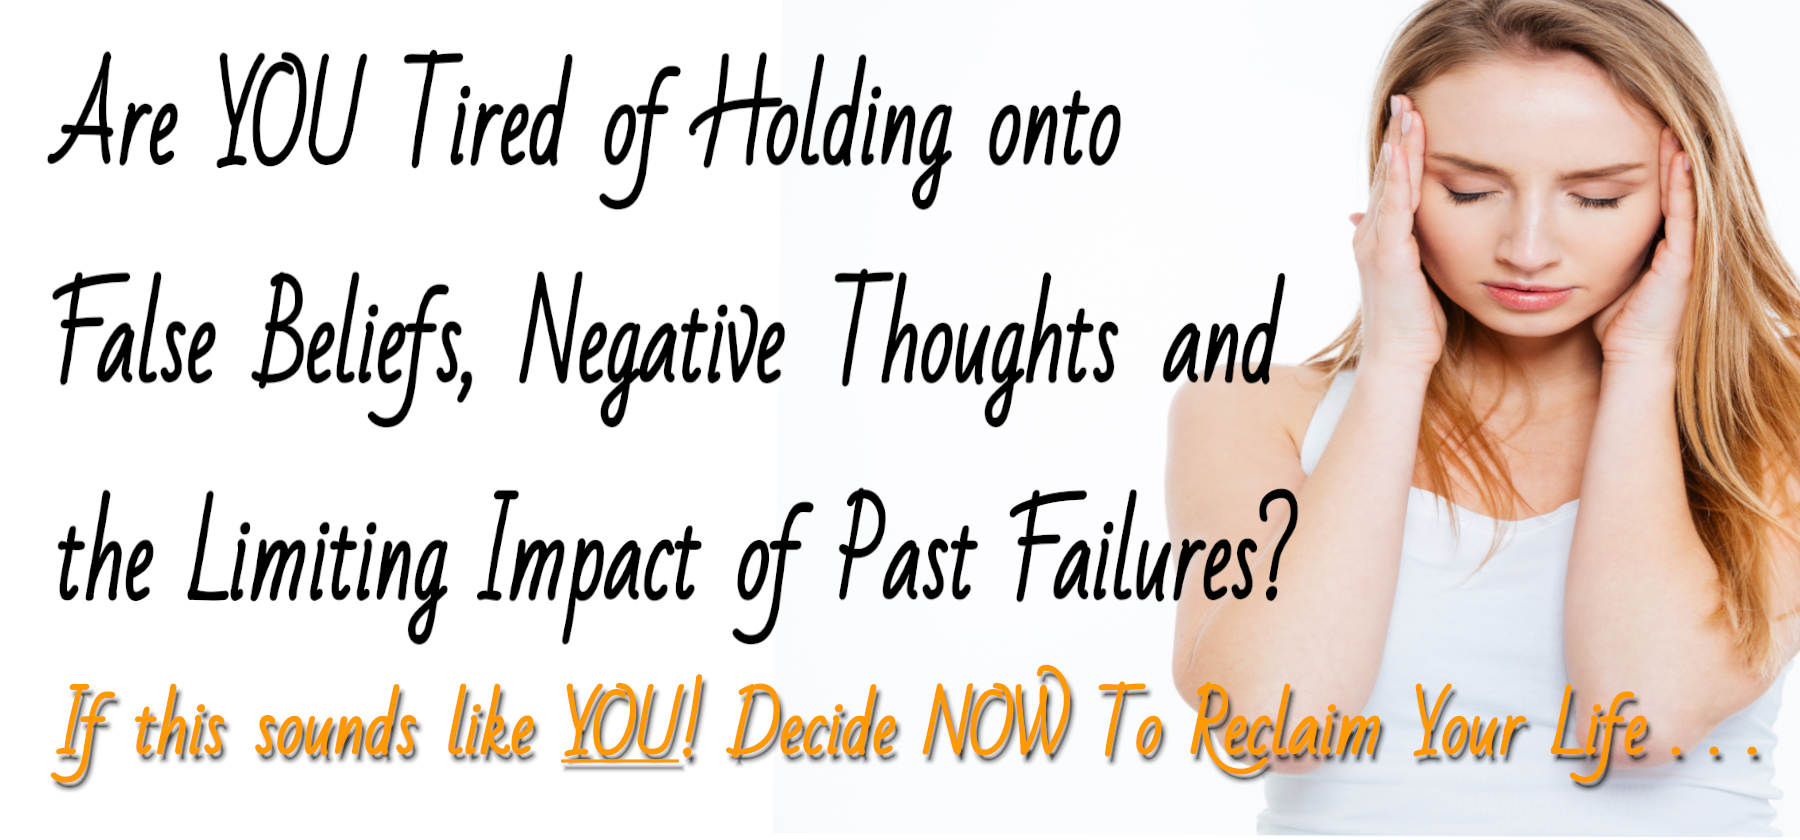 Are You Tired of holding onto False Beliefs